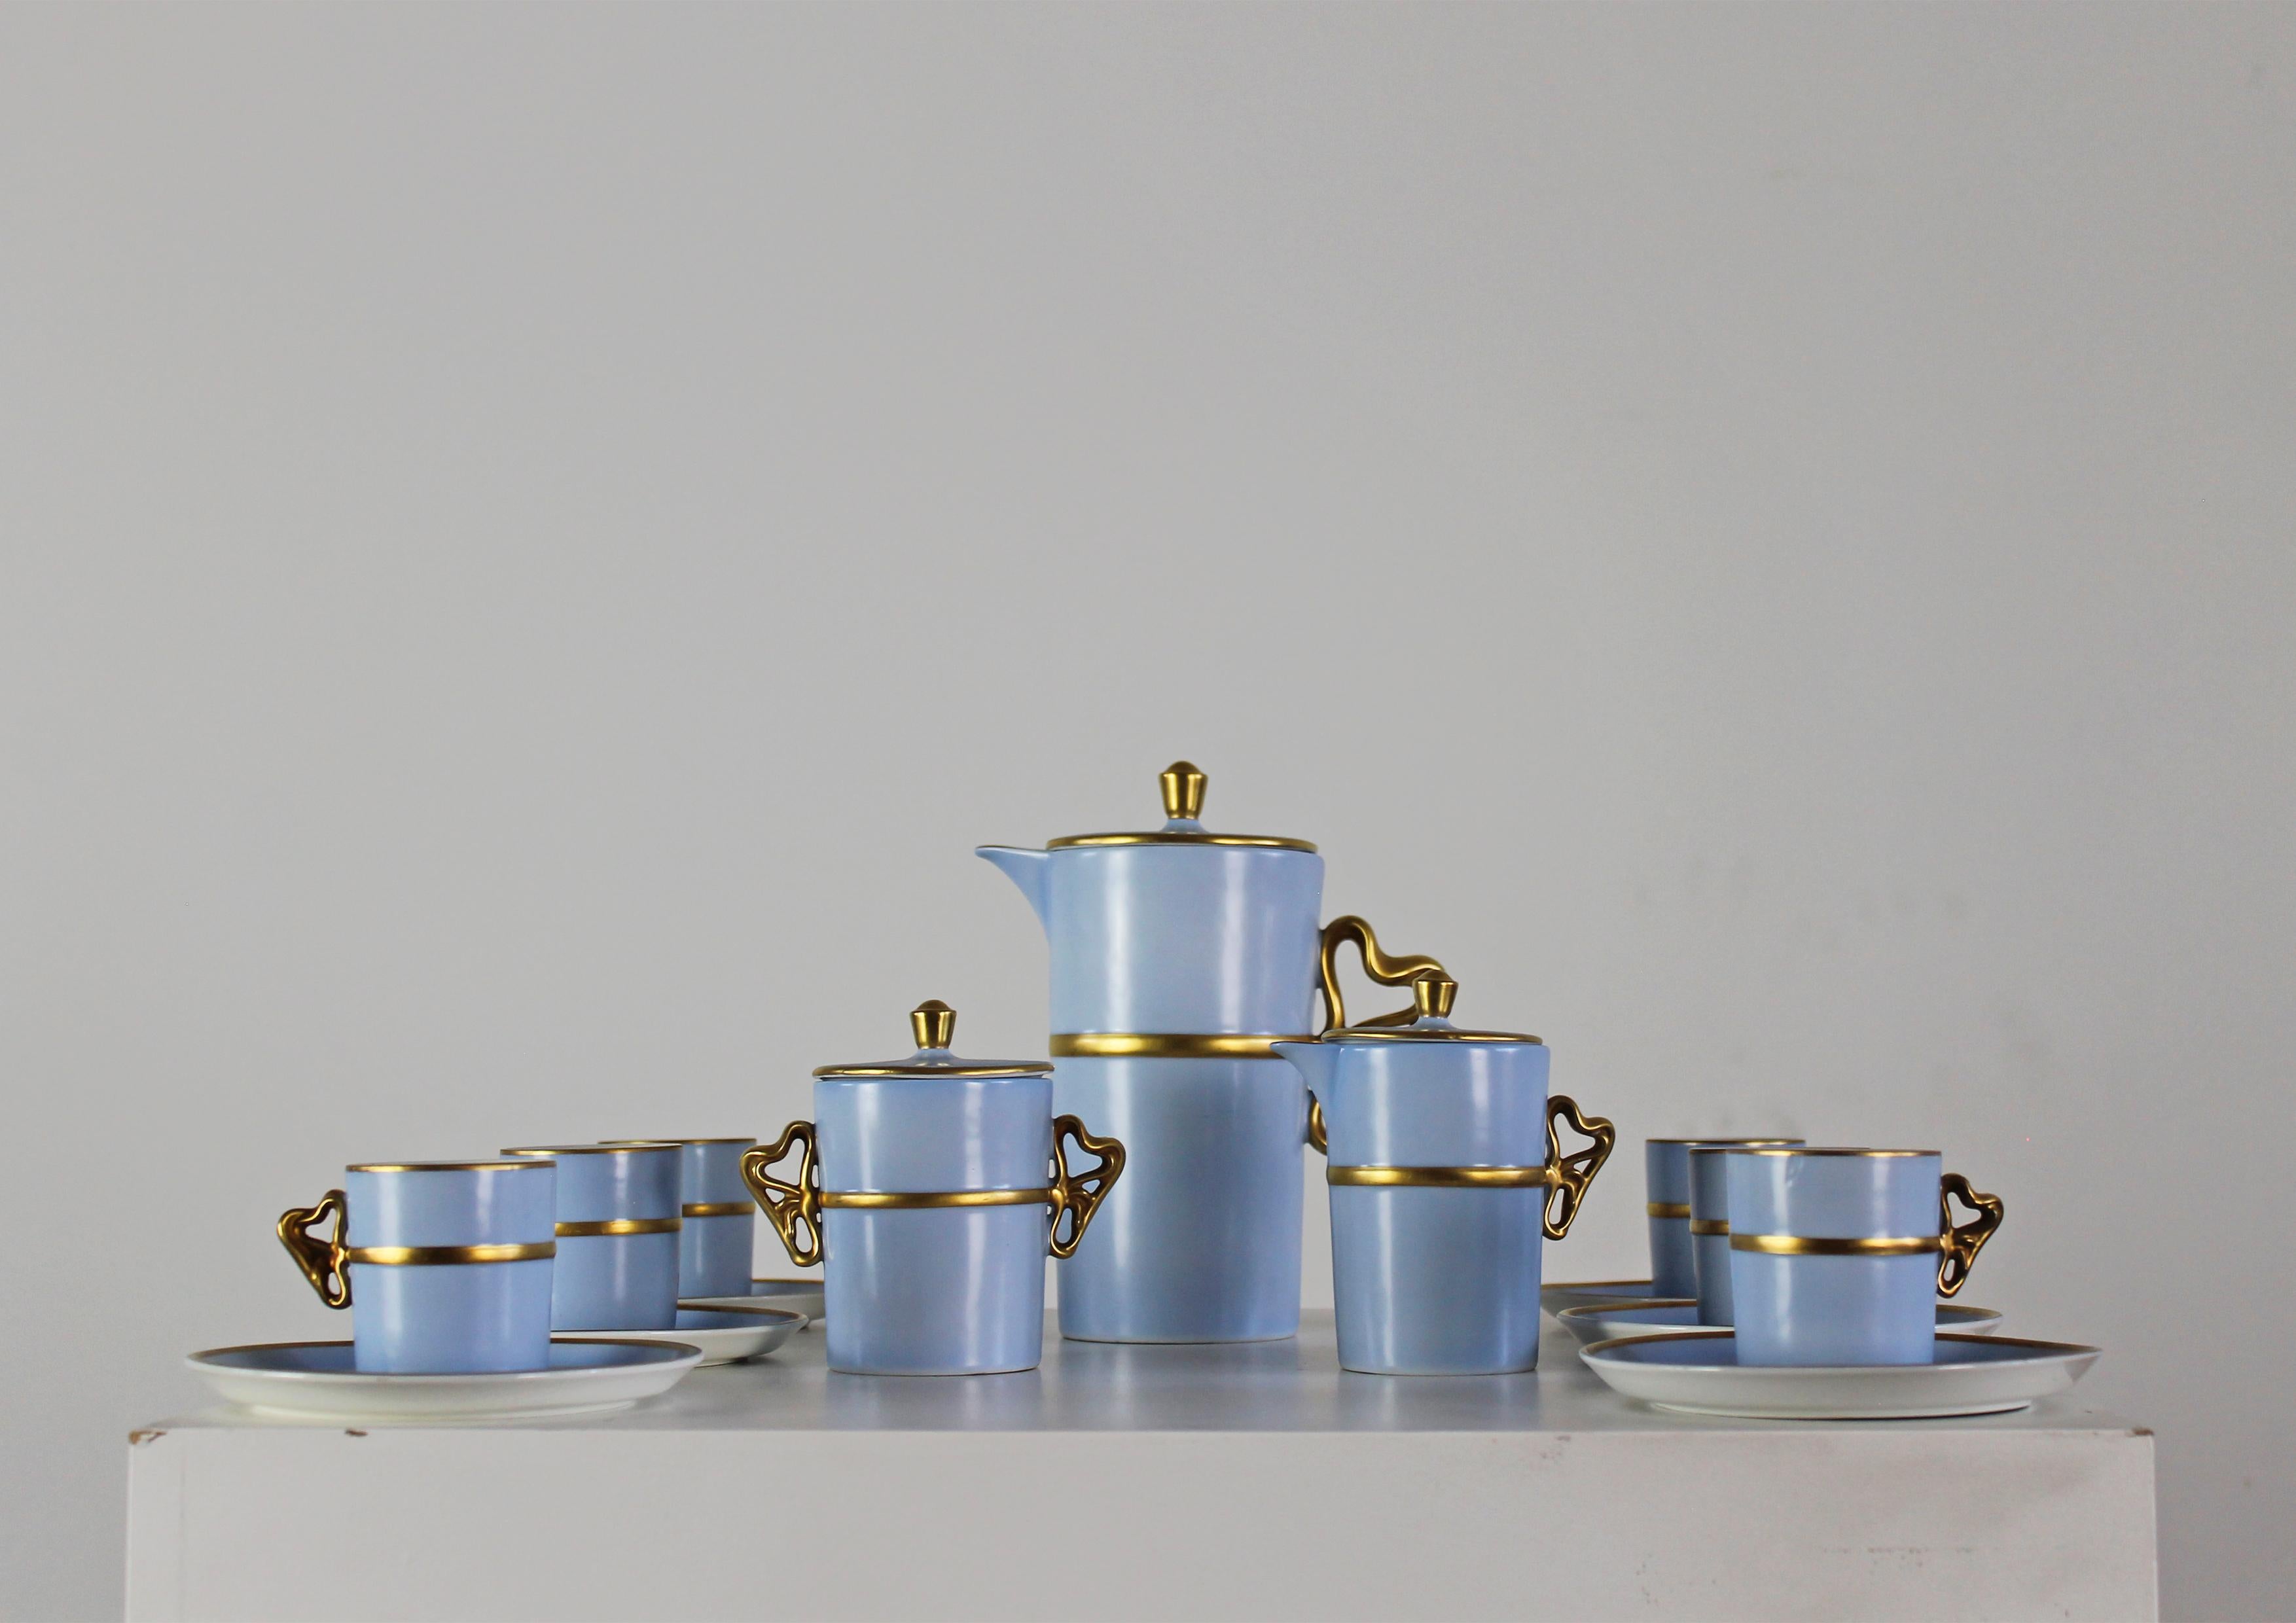 Rare ceramic tea service for six in a very elegant light blue shade with decoration refined in pure gold, it was designed by Antonia Campi and manufactured by Laveno Ceramica in Verbano during the early 1950s. 

This set is composed of six (6)